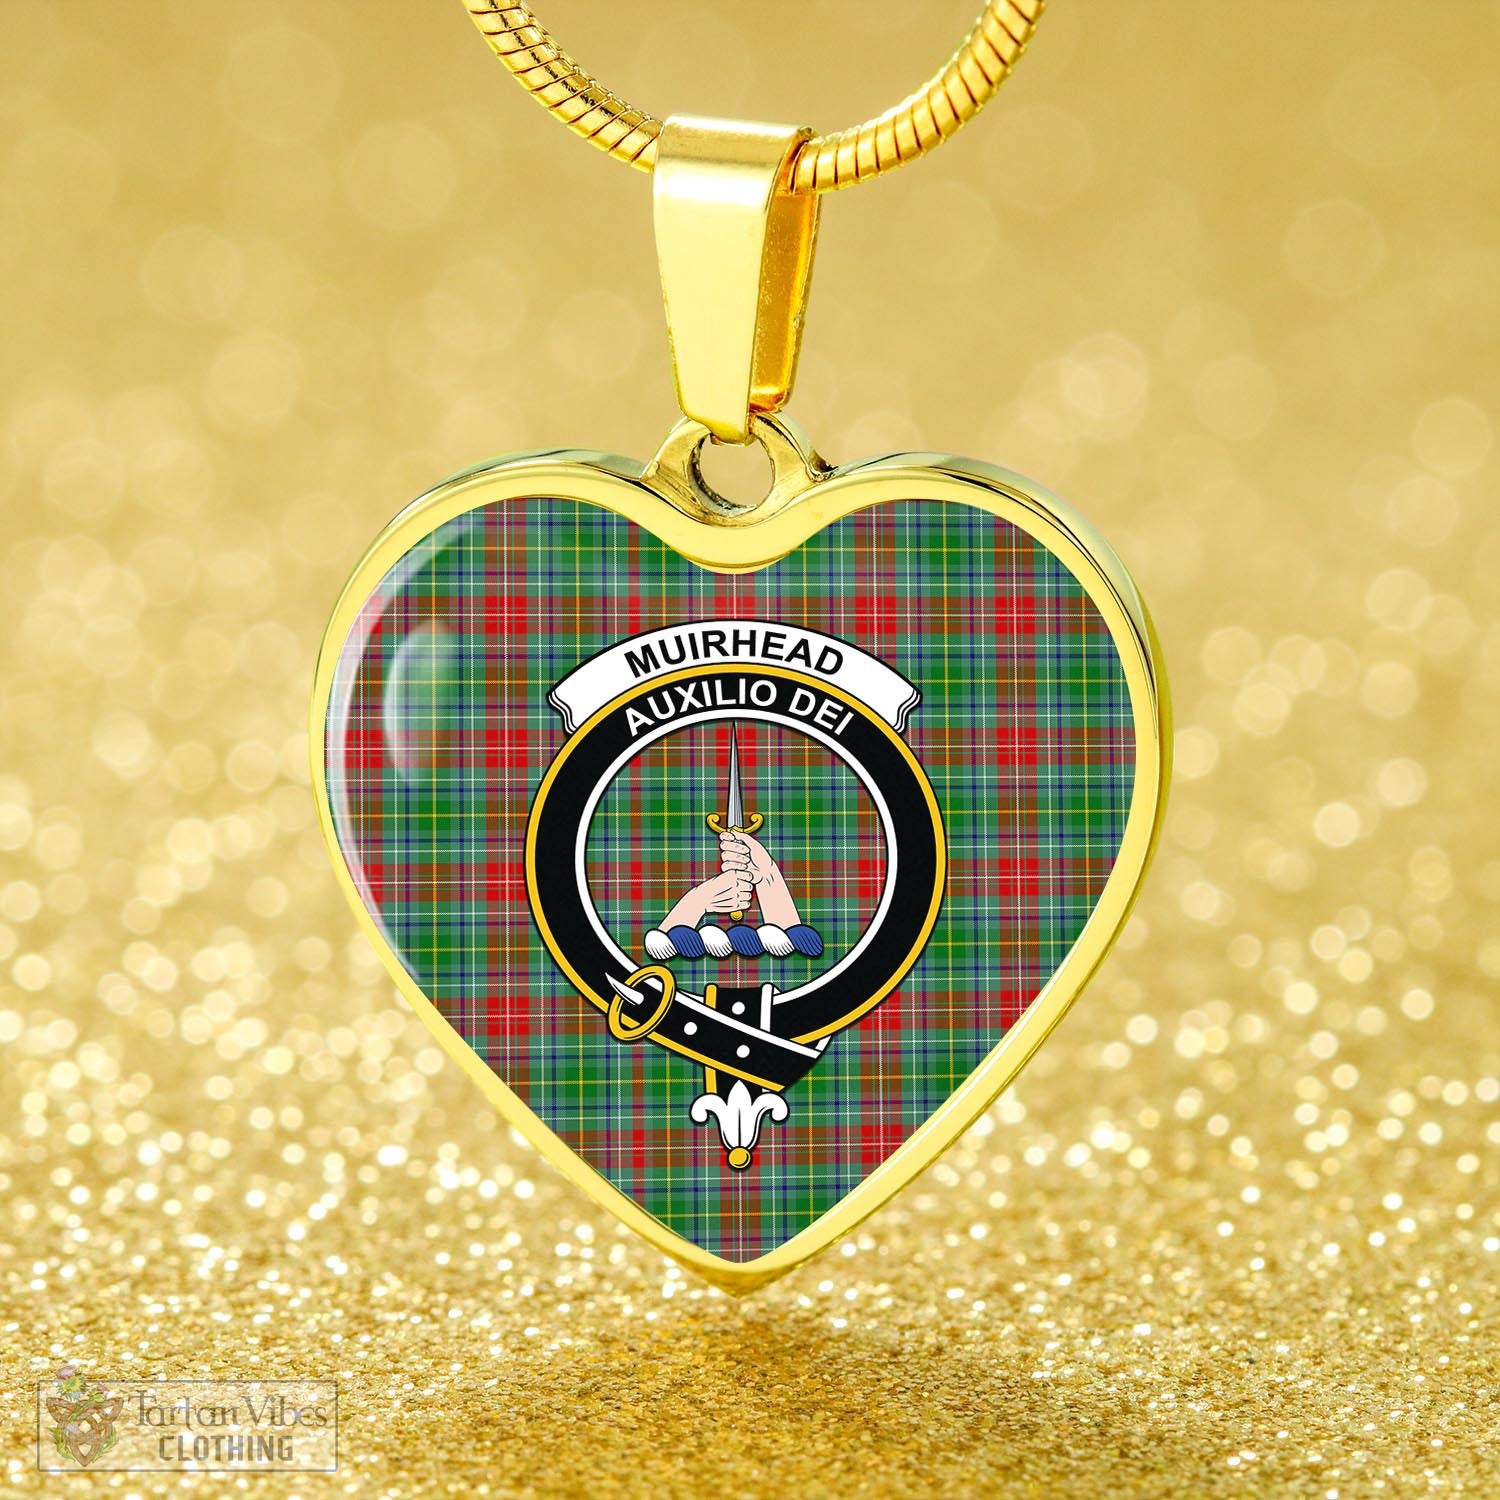 Tartan Vibes Clothing Muirhead Tartan Heart Necklace with Family Crest